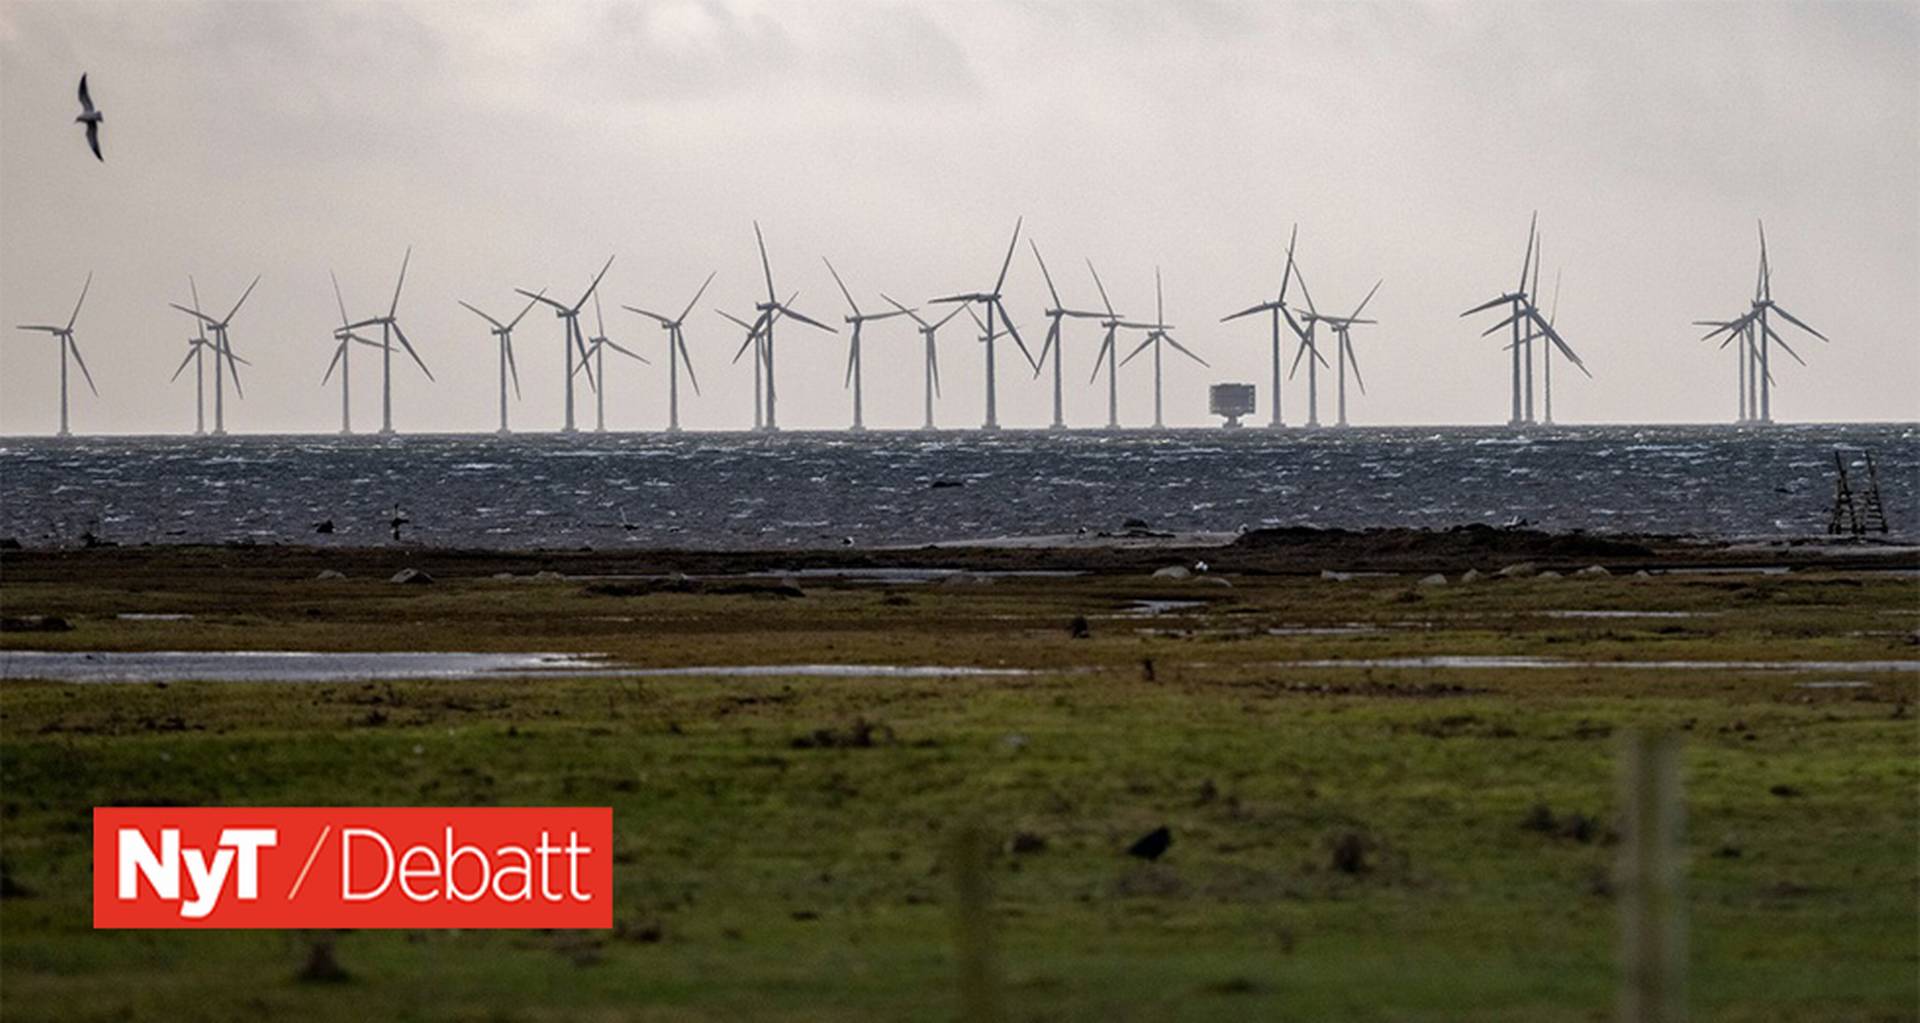 “Weak investigation behind claim that neighbors support offshore wind power”